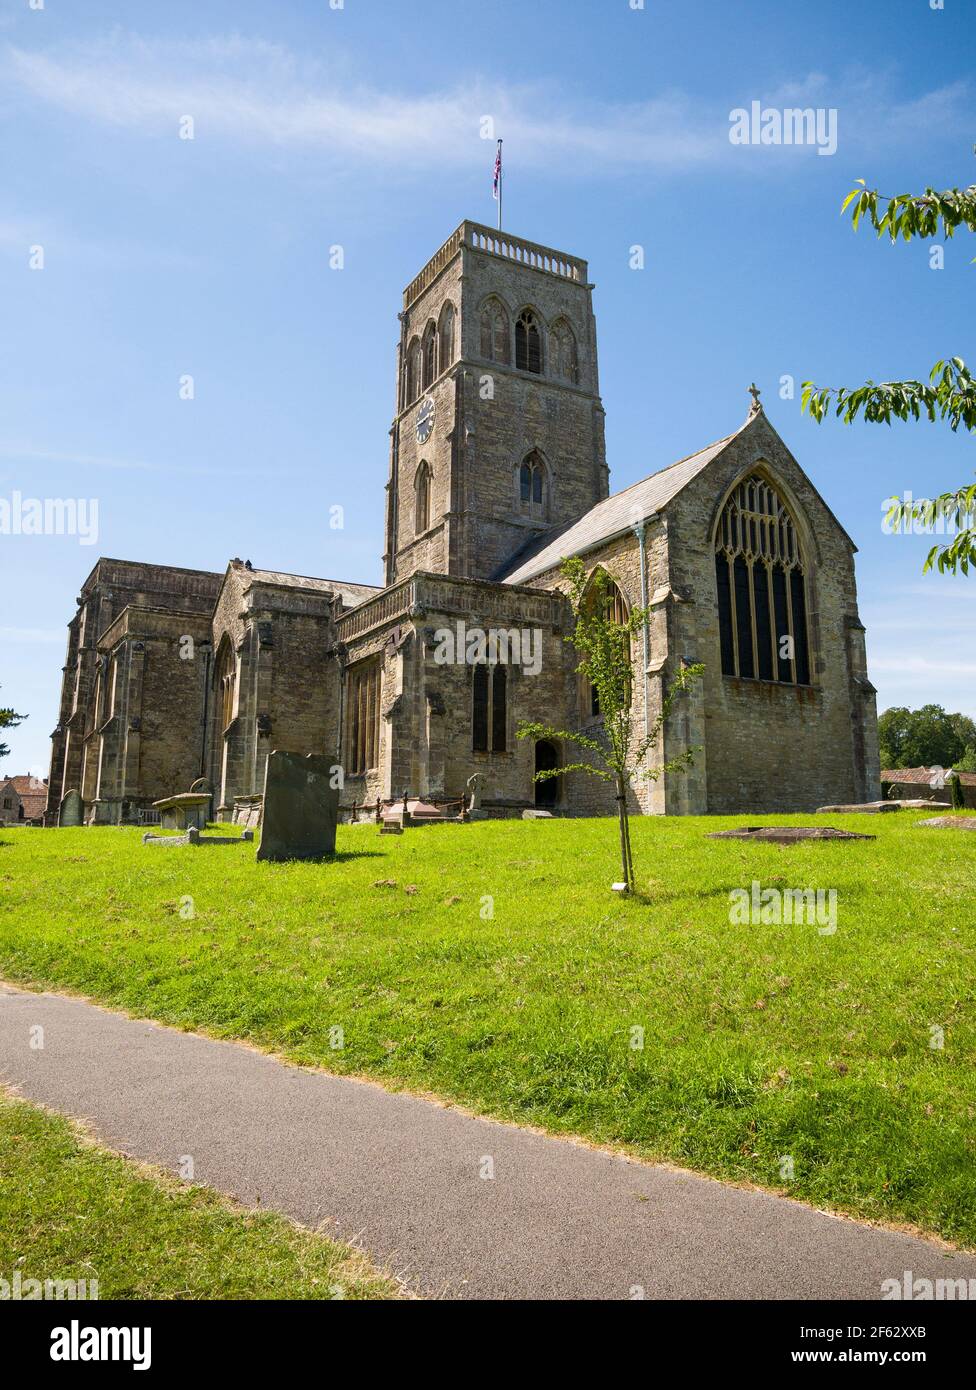 St Mary’s Church in the village of Wedmore, Somerset, England. Stock Photo